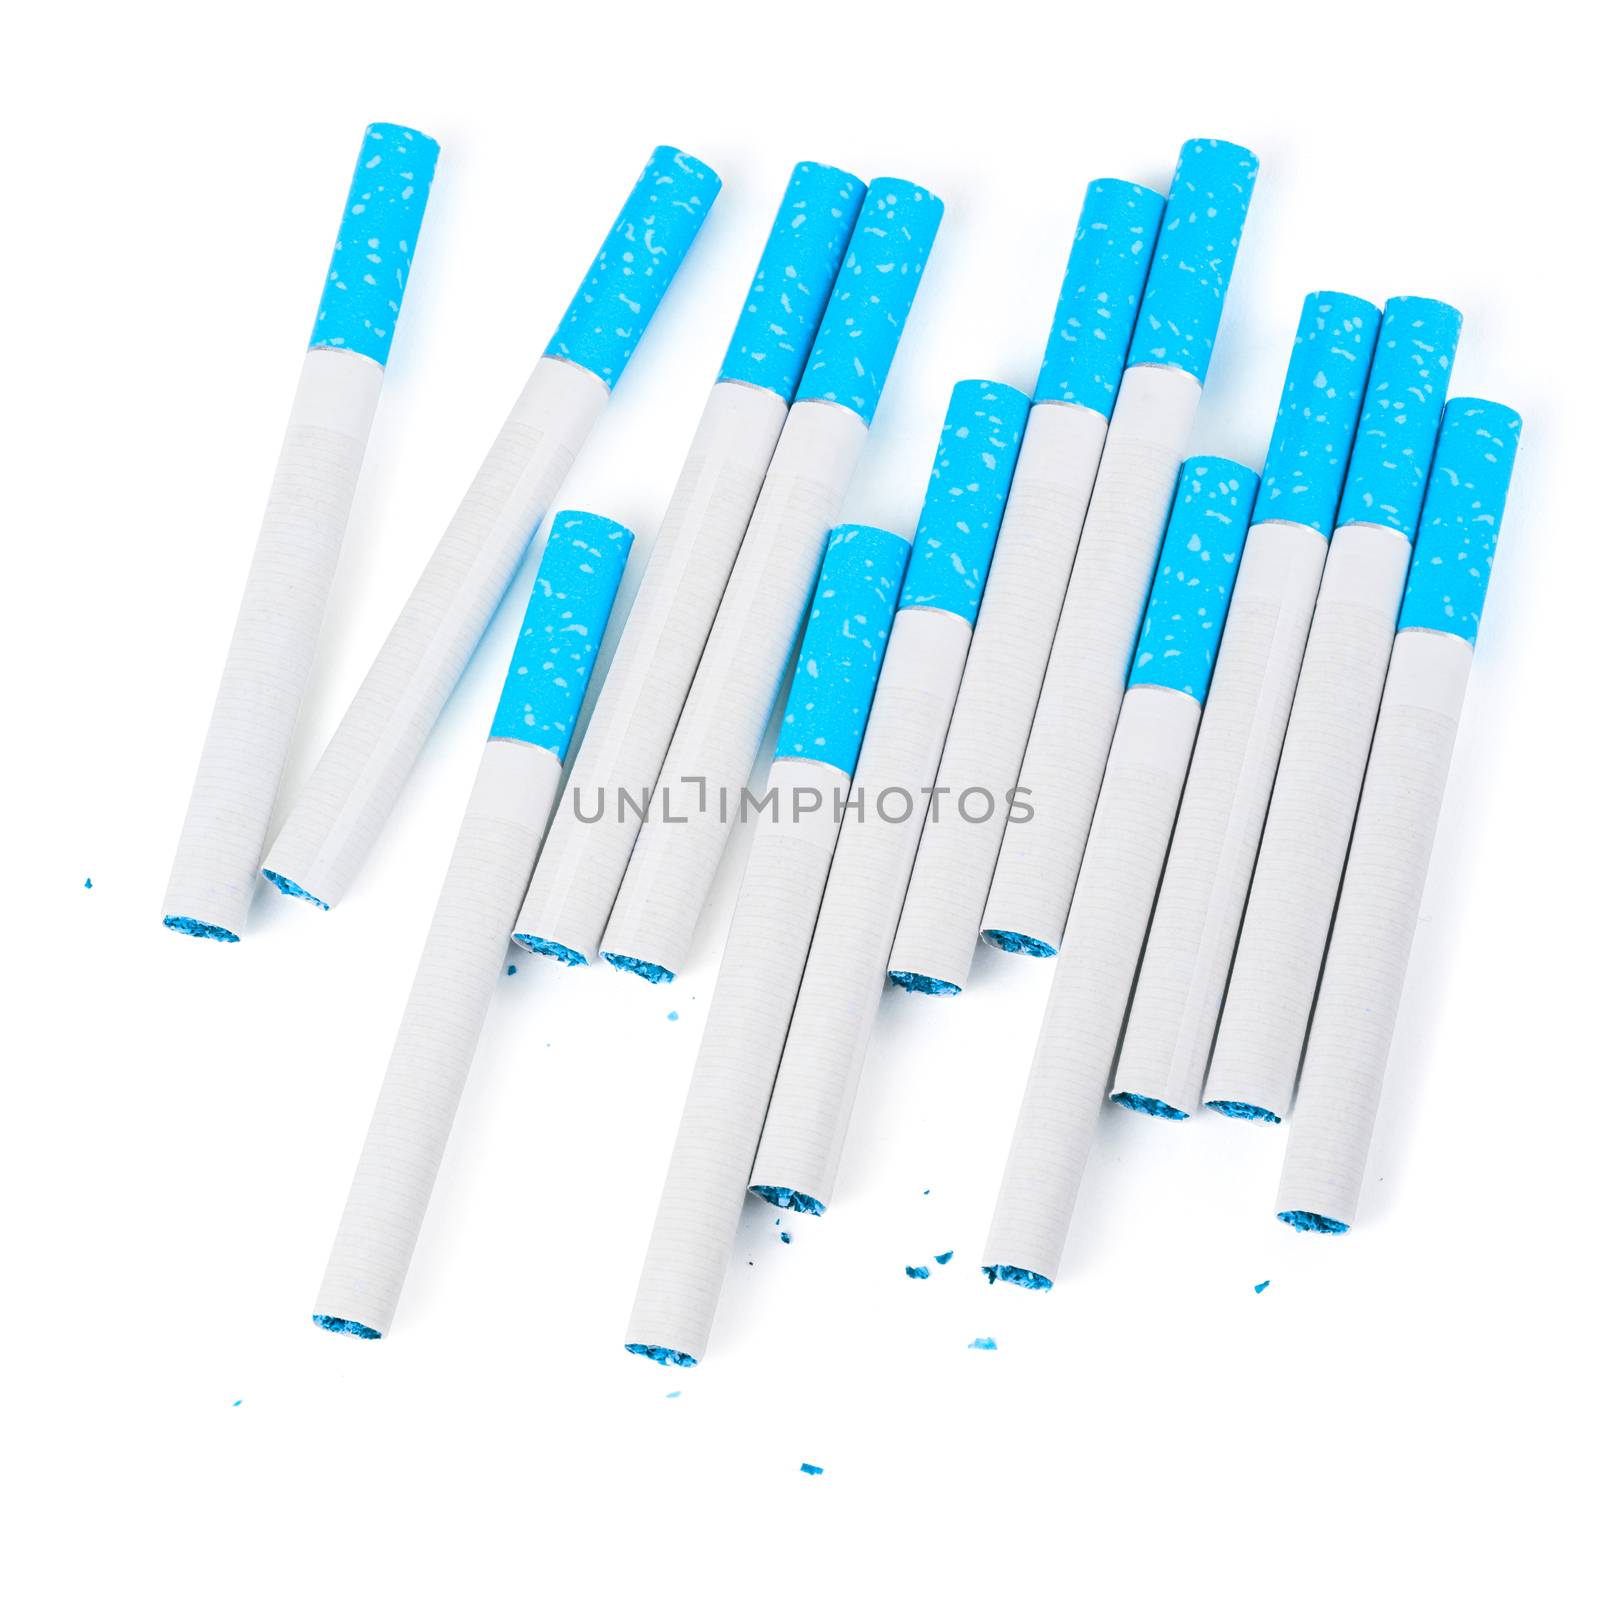 blue filter cigarettes isolated on white background by z1b